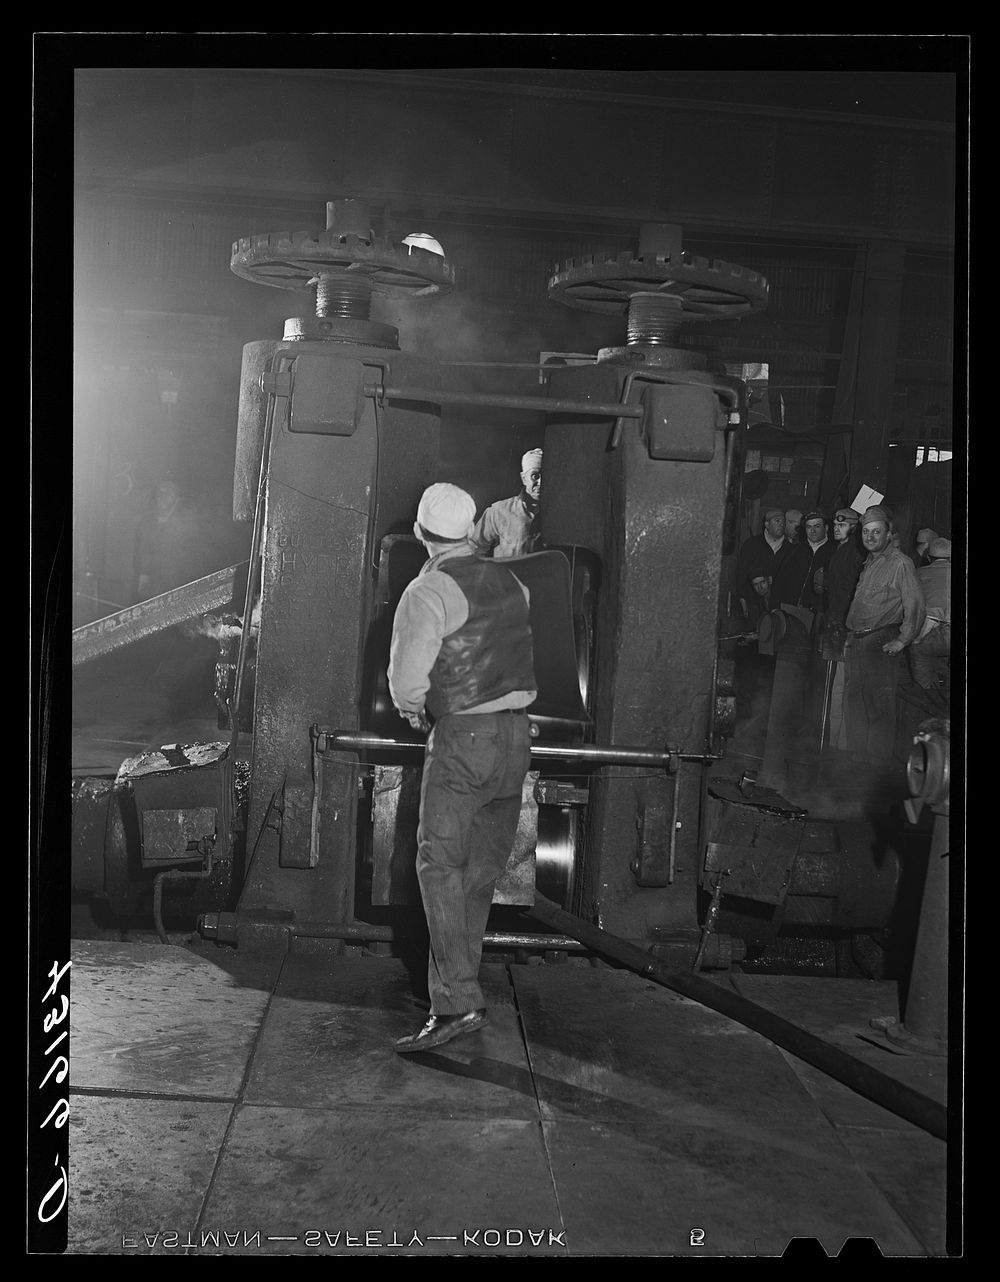 Workers at rolling machine in Washington Tinplate Company. Washington, Pennsylvania. Sourced from the Library of Congress.